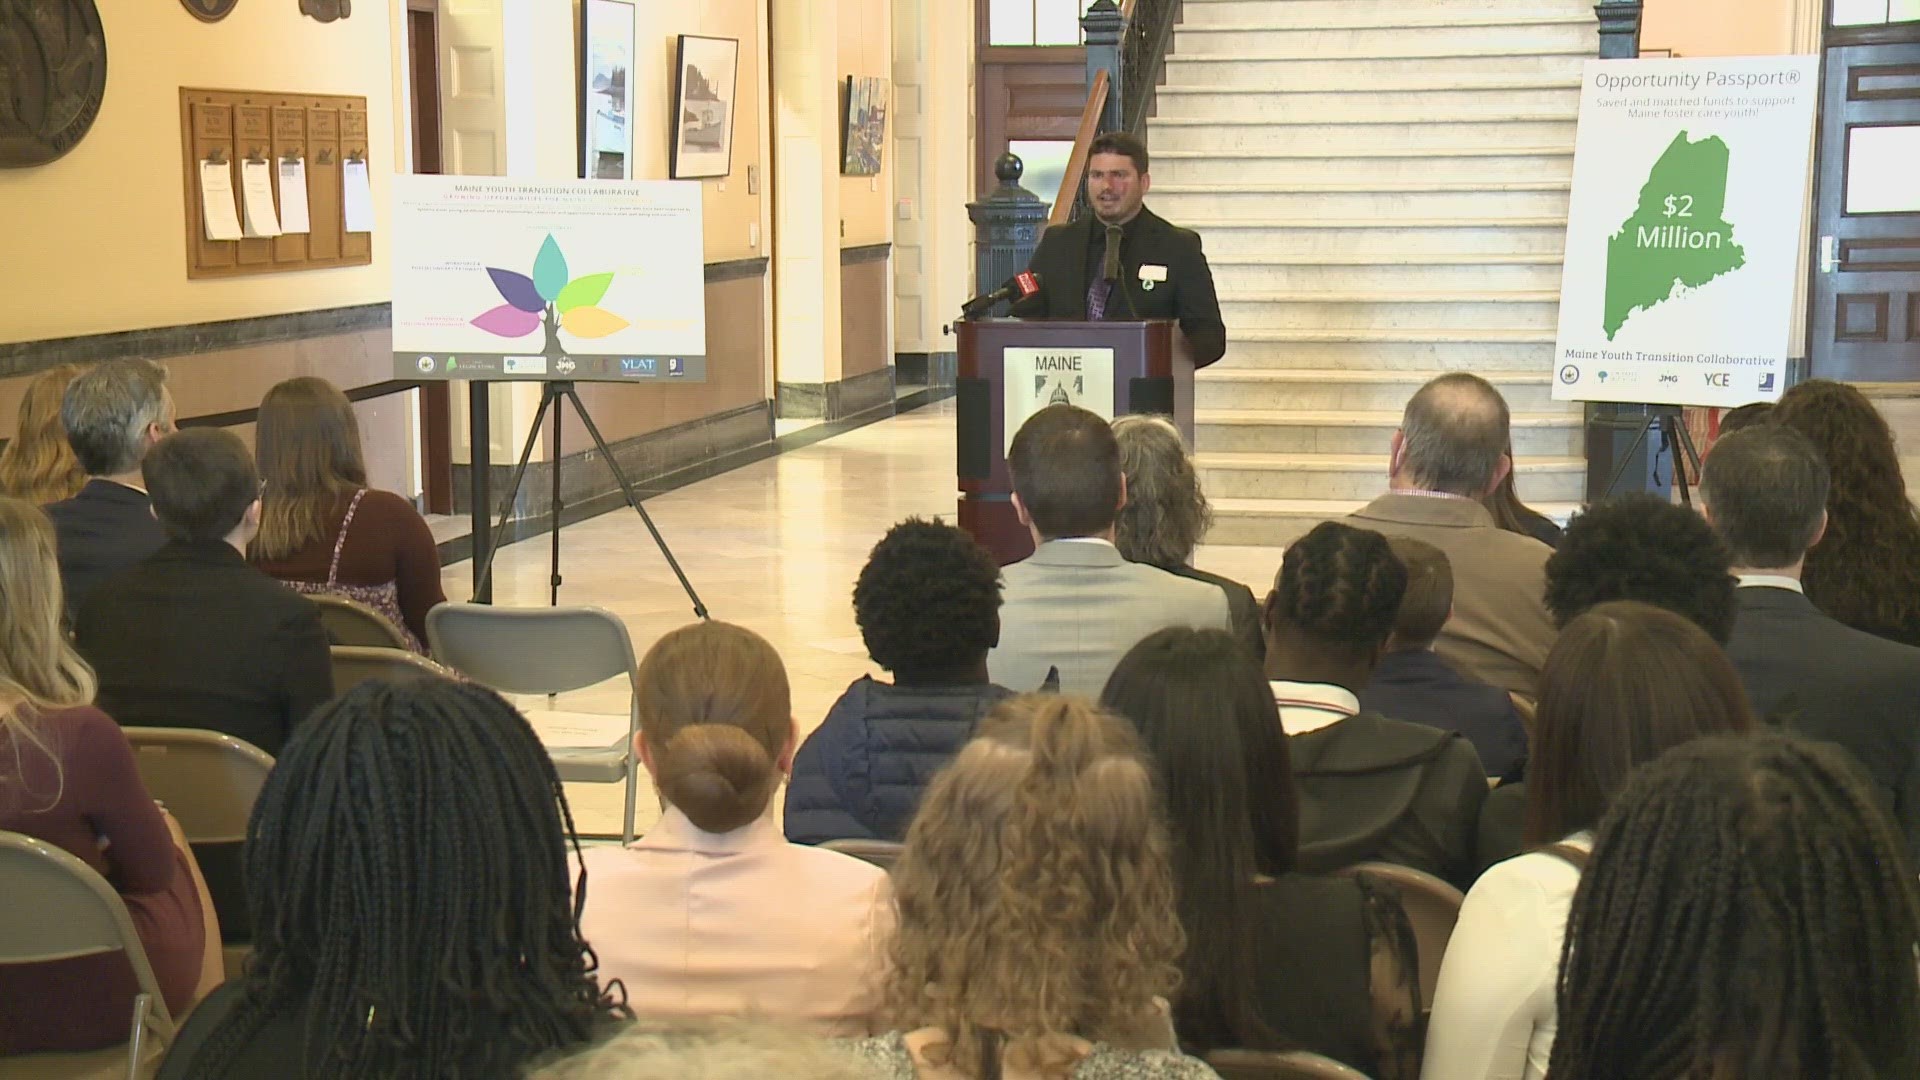 The advocates gathered in Augusta to celebrate a program that works to help with their transition. Opportunity Passport has brought financial support to hundreds.